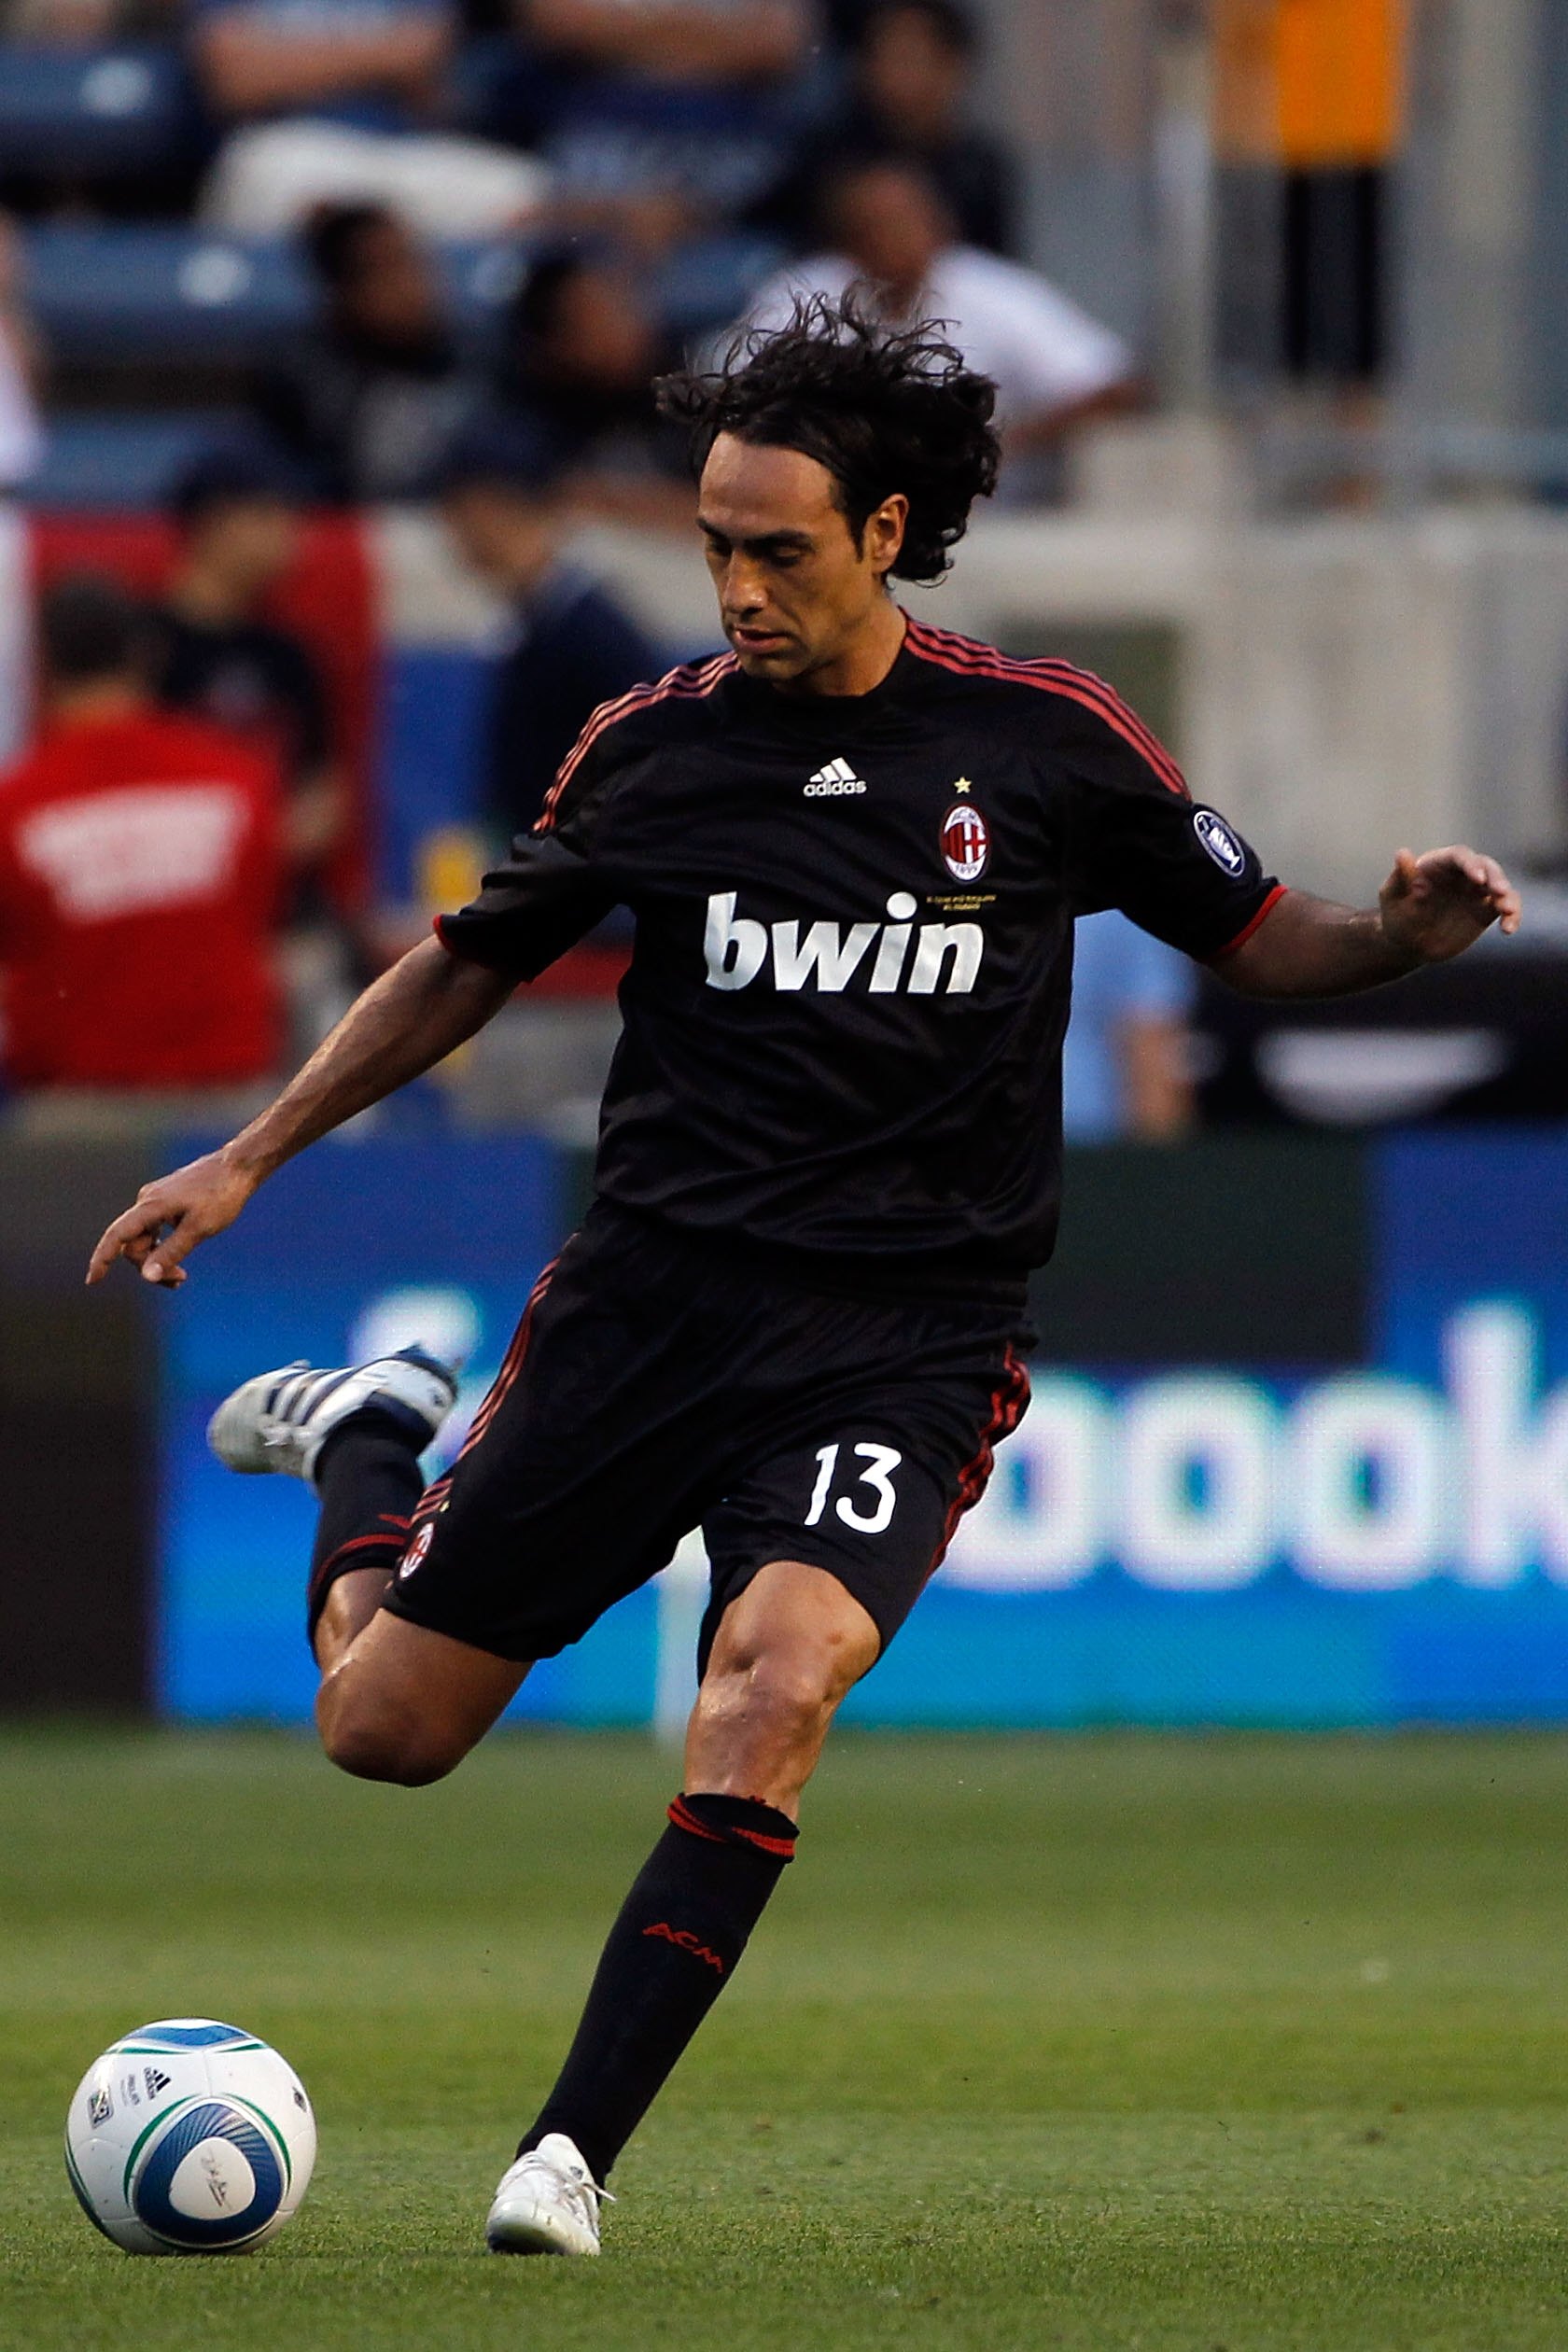 CHICAGO - MAY 30:  Alessandro Nesta #13 of AC Milan kicks the ball while taking on the Chicago Fire during an international friendly at Toyota Park on May 30, 2010 in Chicago, Illinois.  (Photo by Jonathan Daniel/Getty Images)